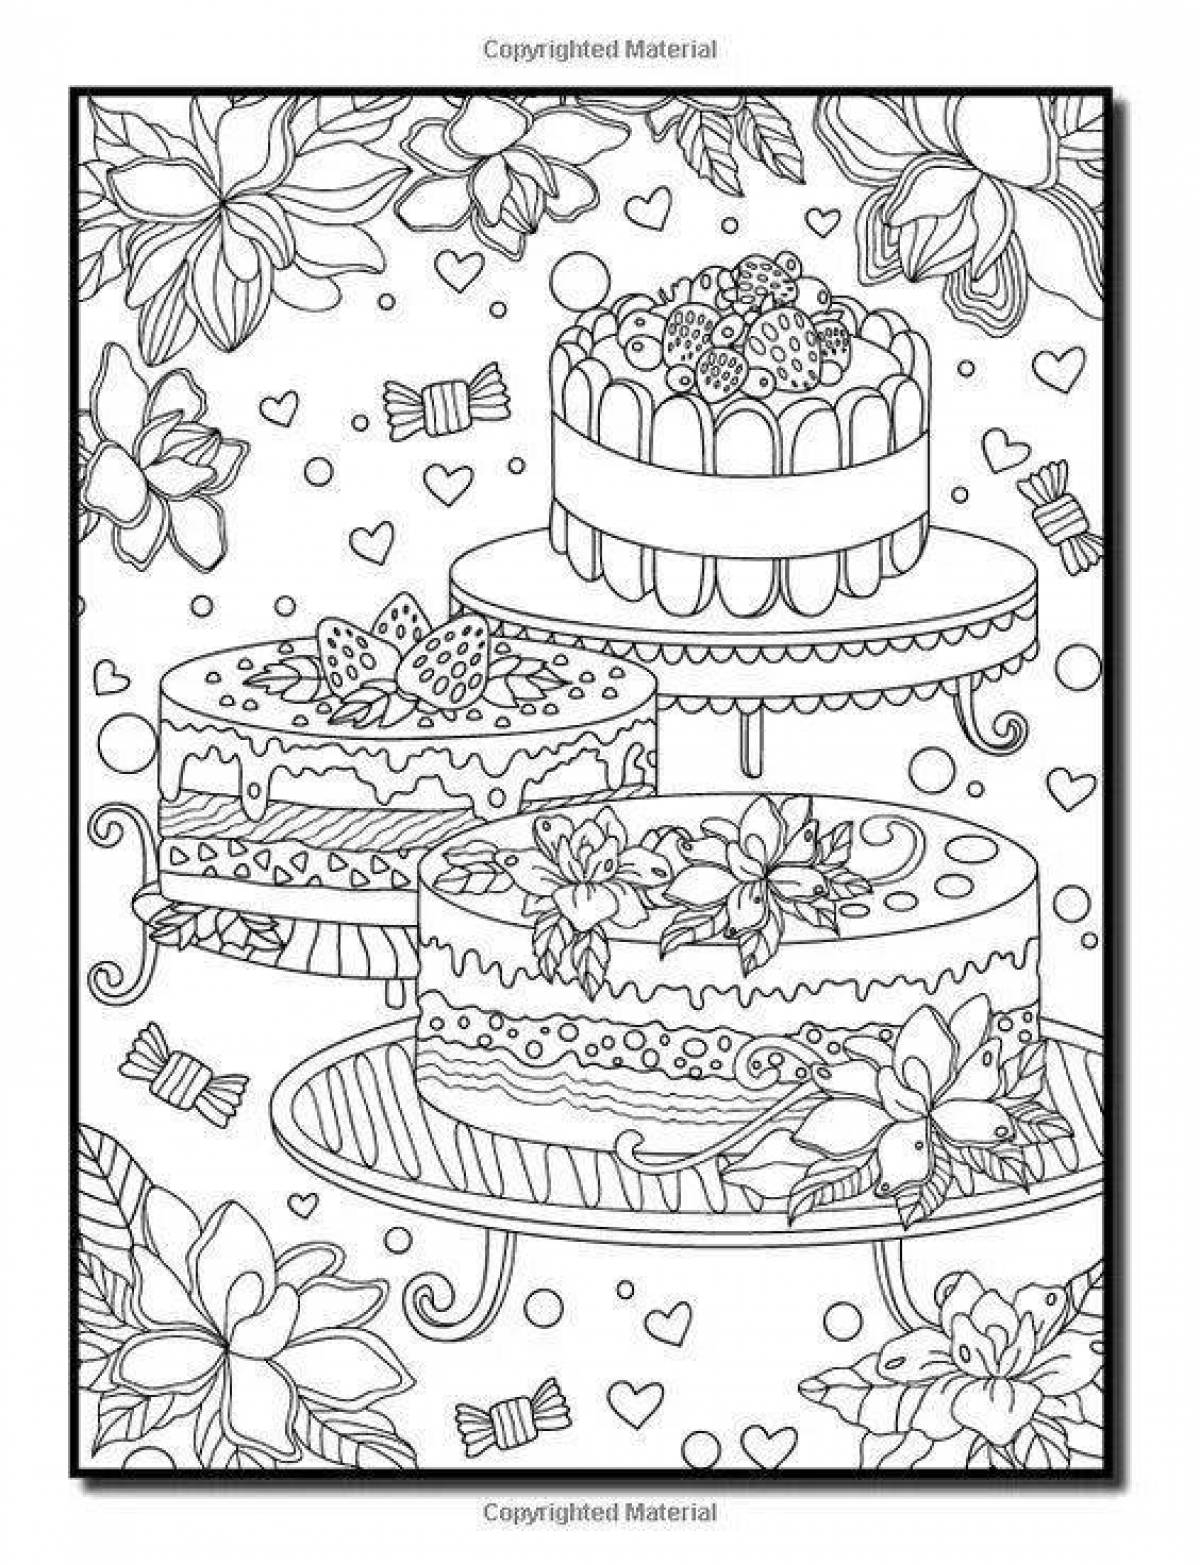 Playful hobby line coloring page